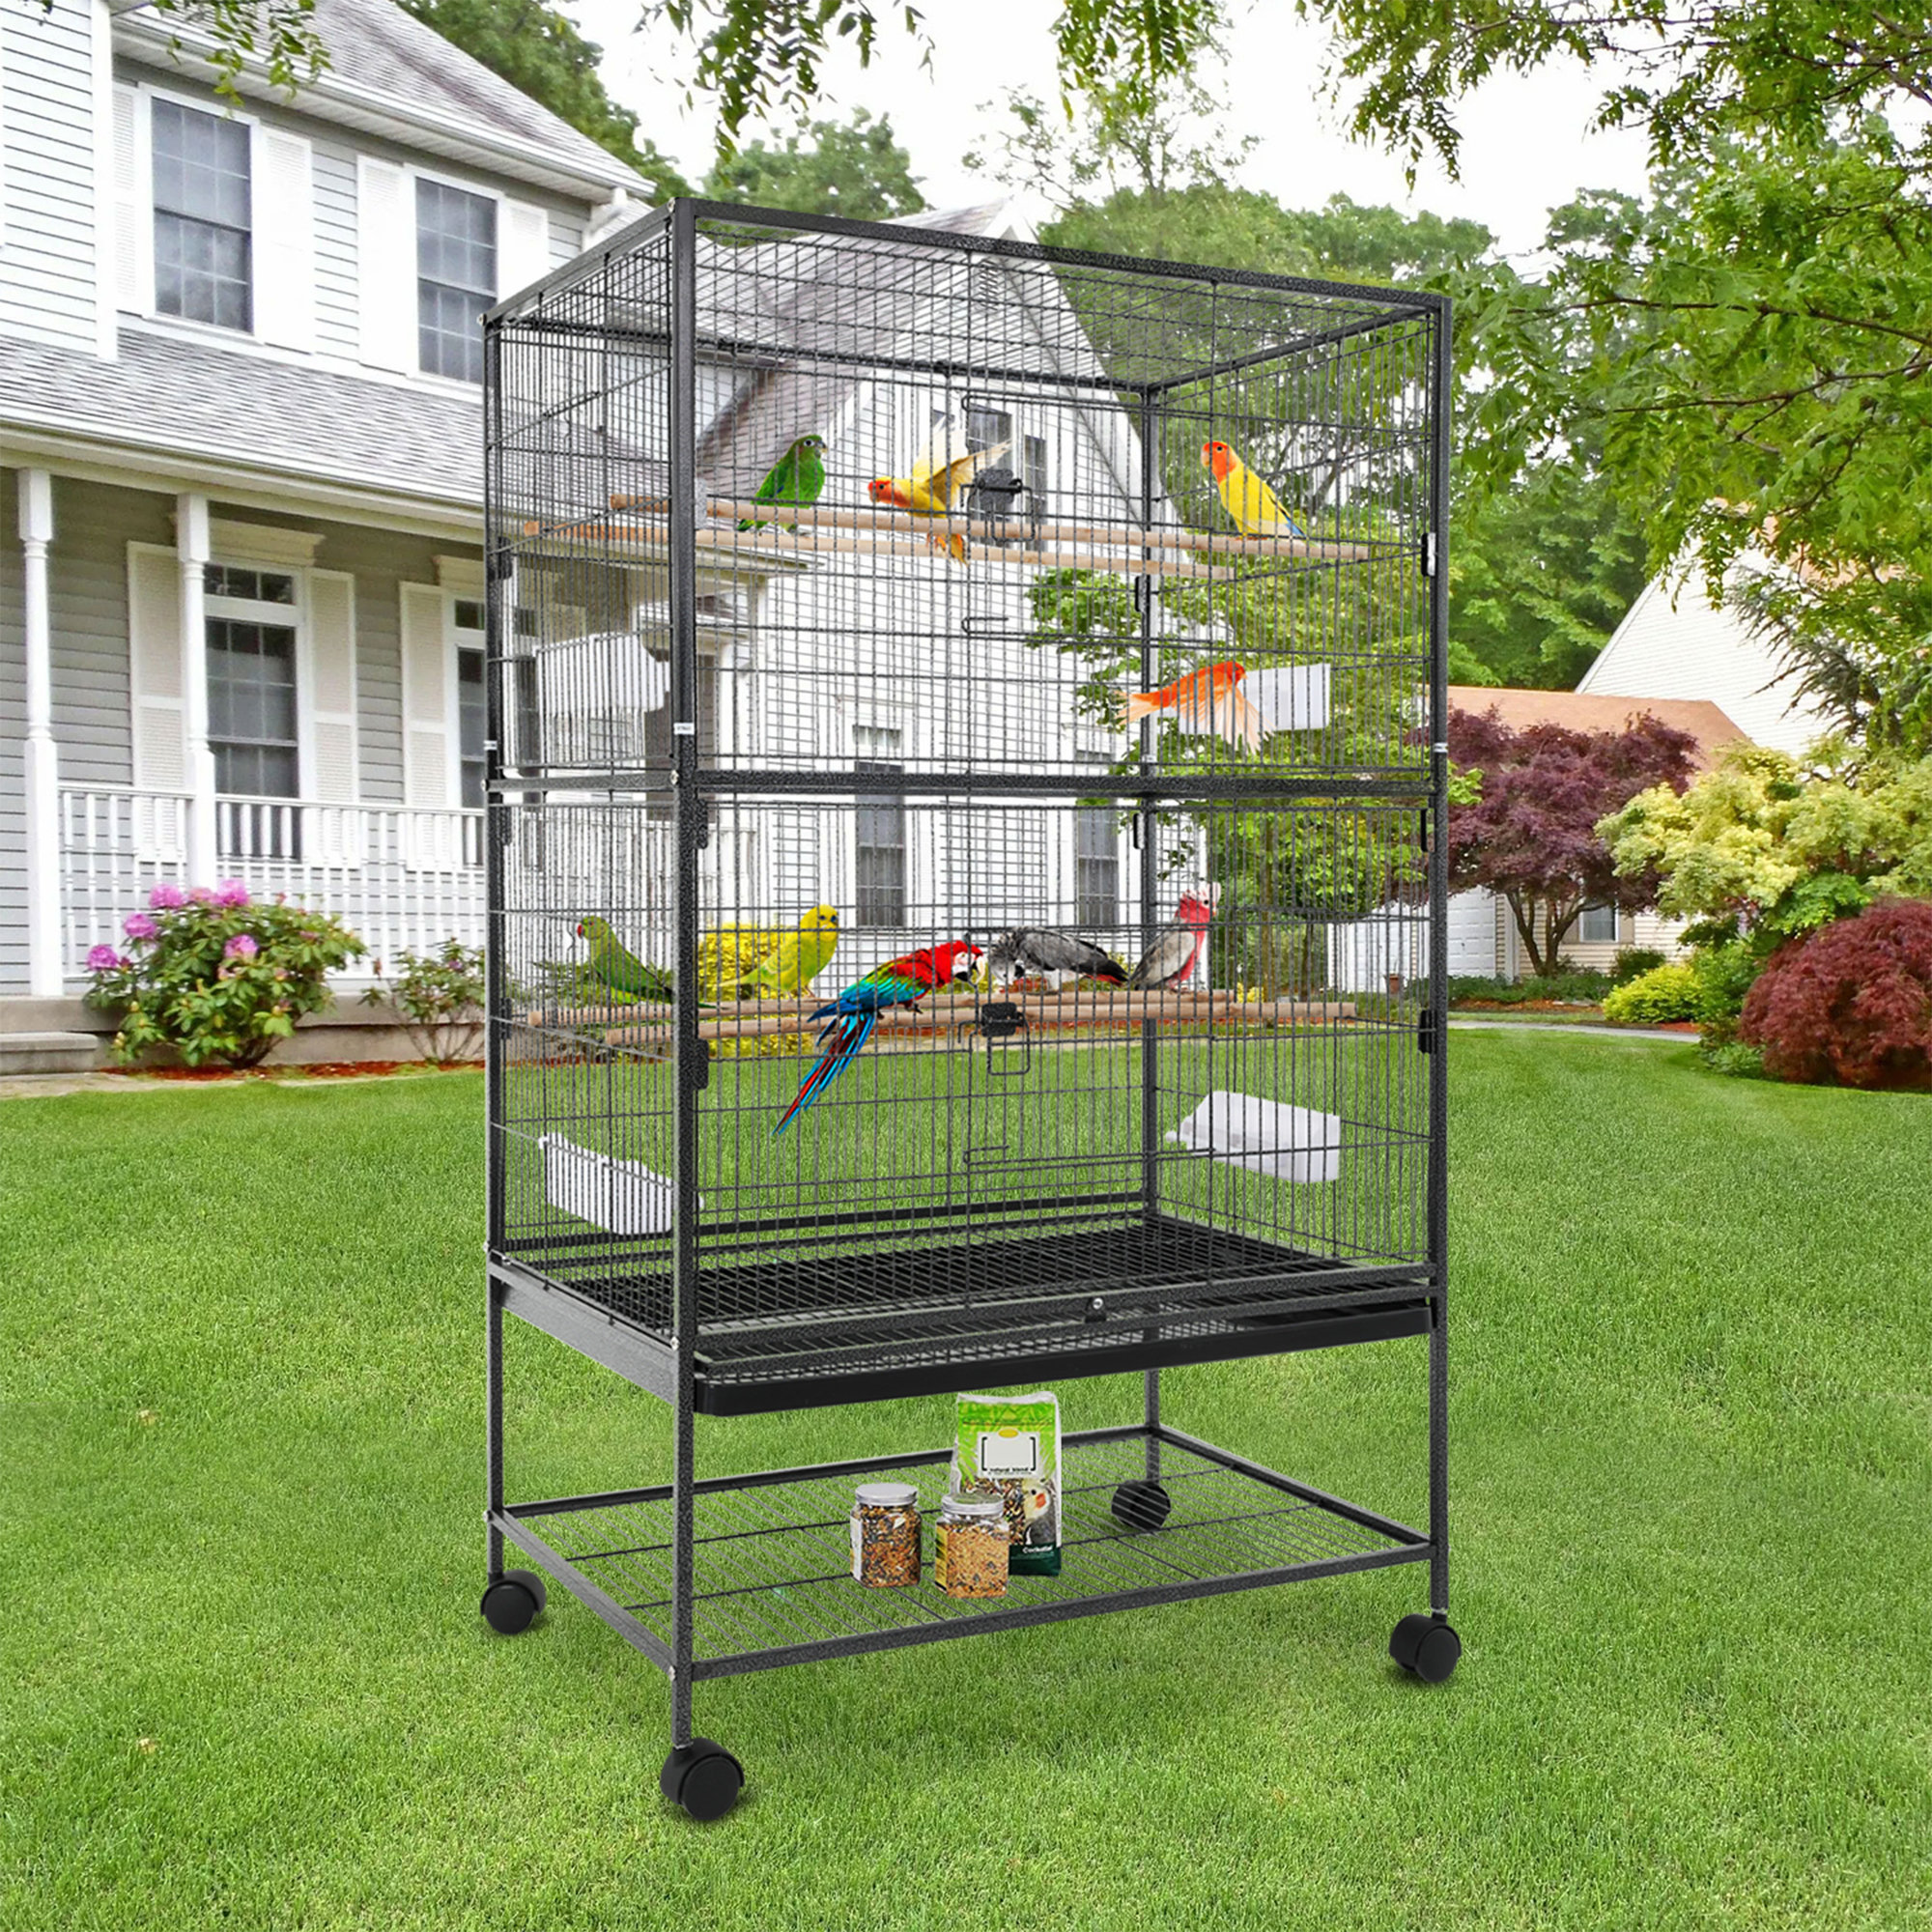 Bird Cages for sale in Alexander, Texas